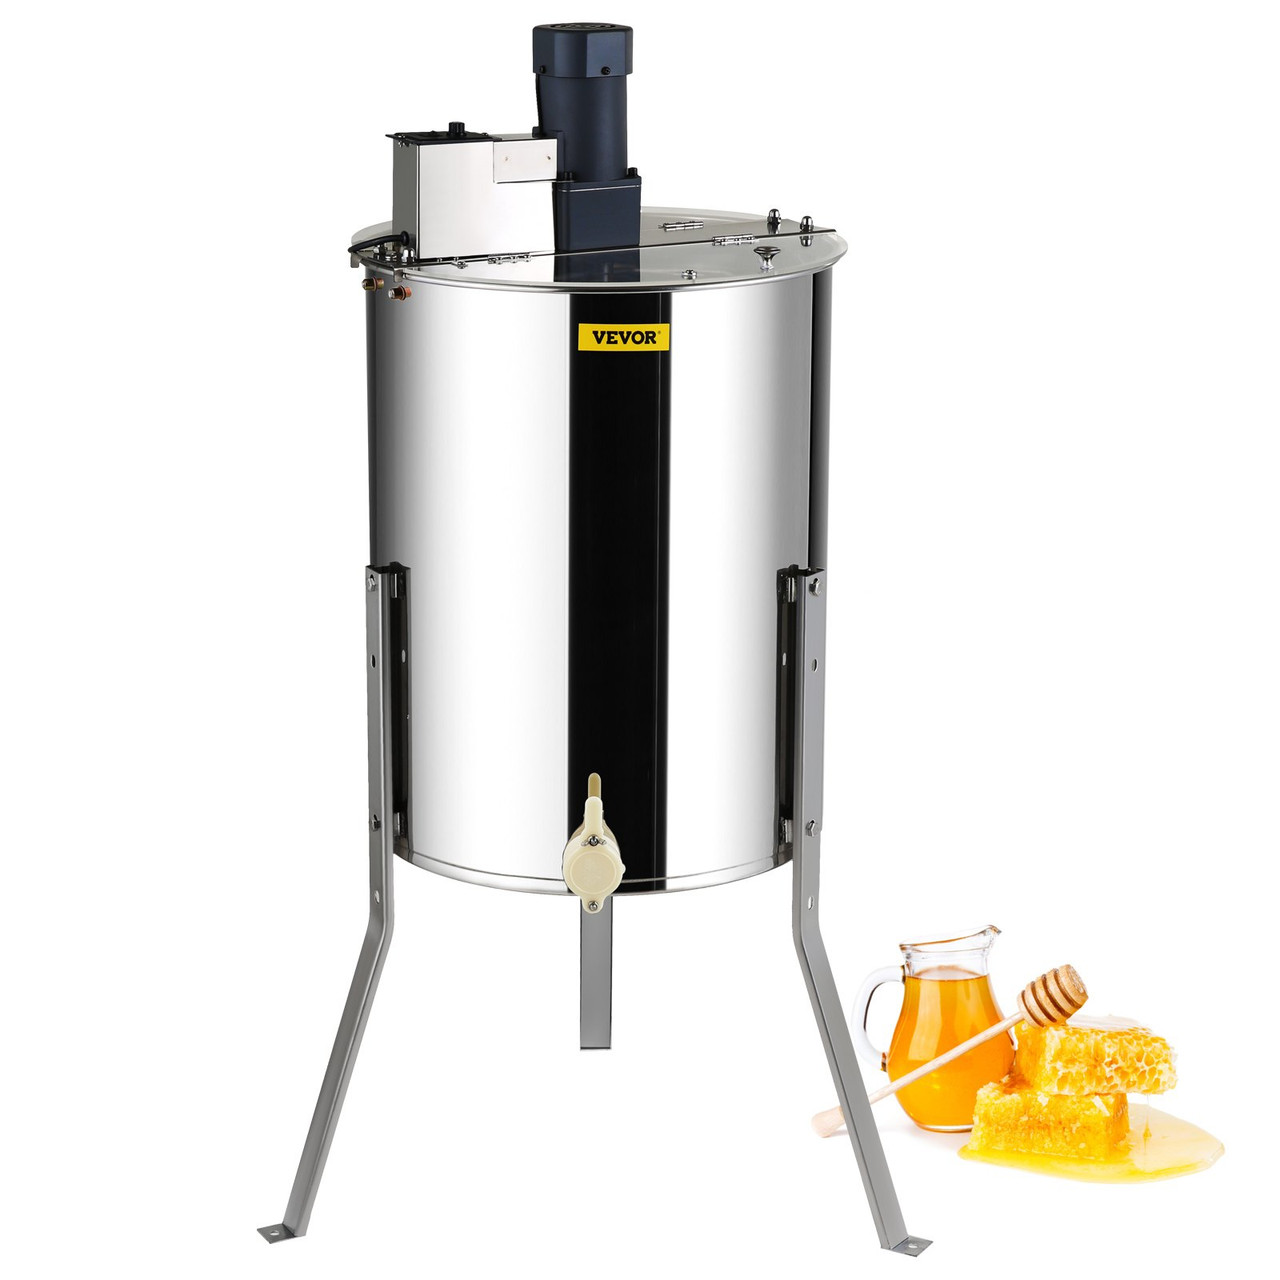 Electric Honey Extractor, 4/8 Frames Honey Spinner Extractor, Stainless Steel Beekeeping Extraction, Honeycomb Drum Spinner with Lid, Apiary Centrifuge Equipment with Height Adjustable Stand